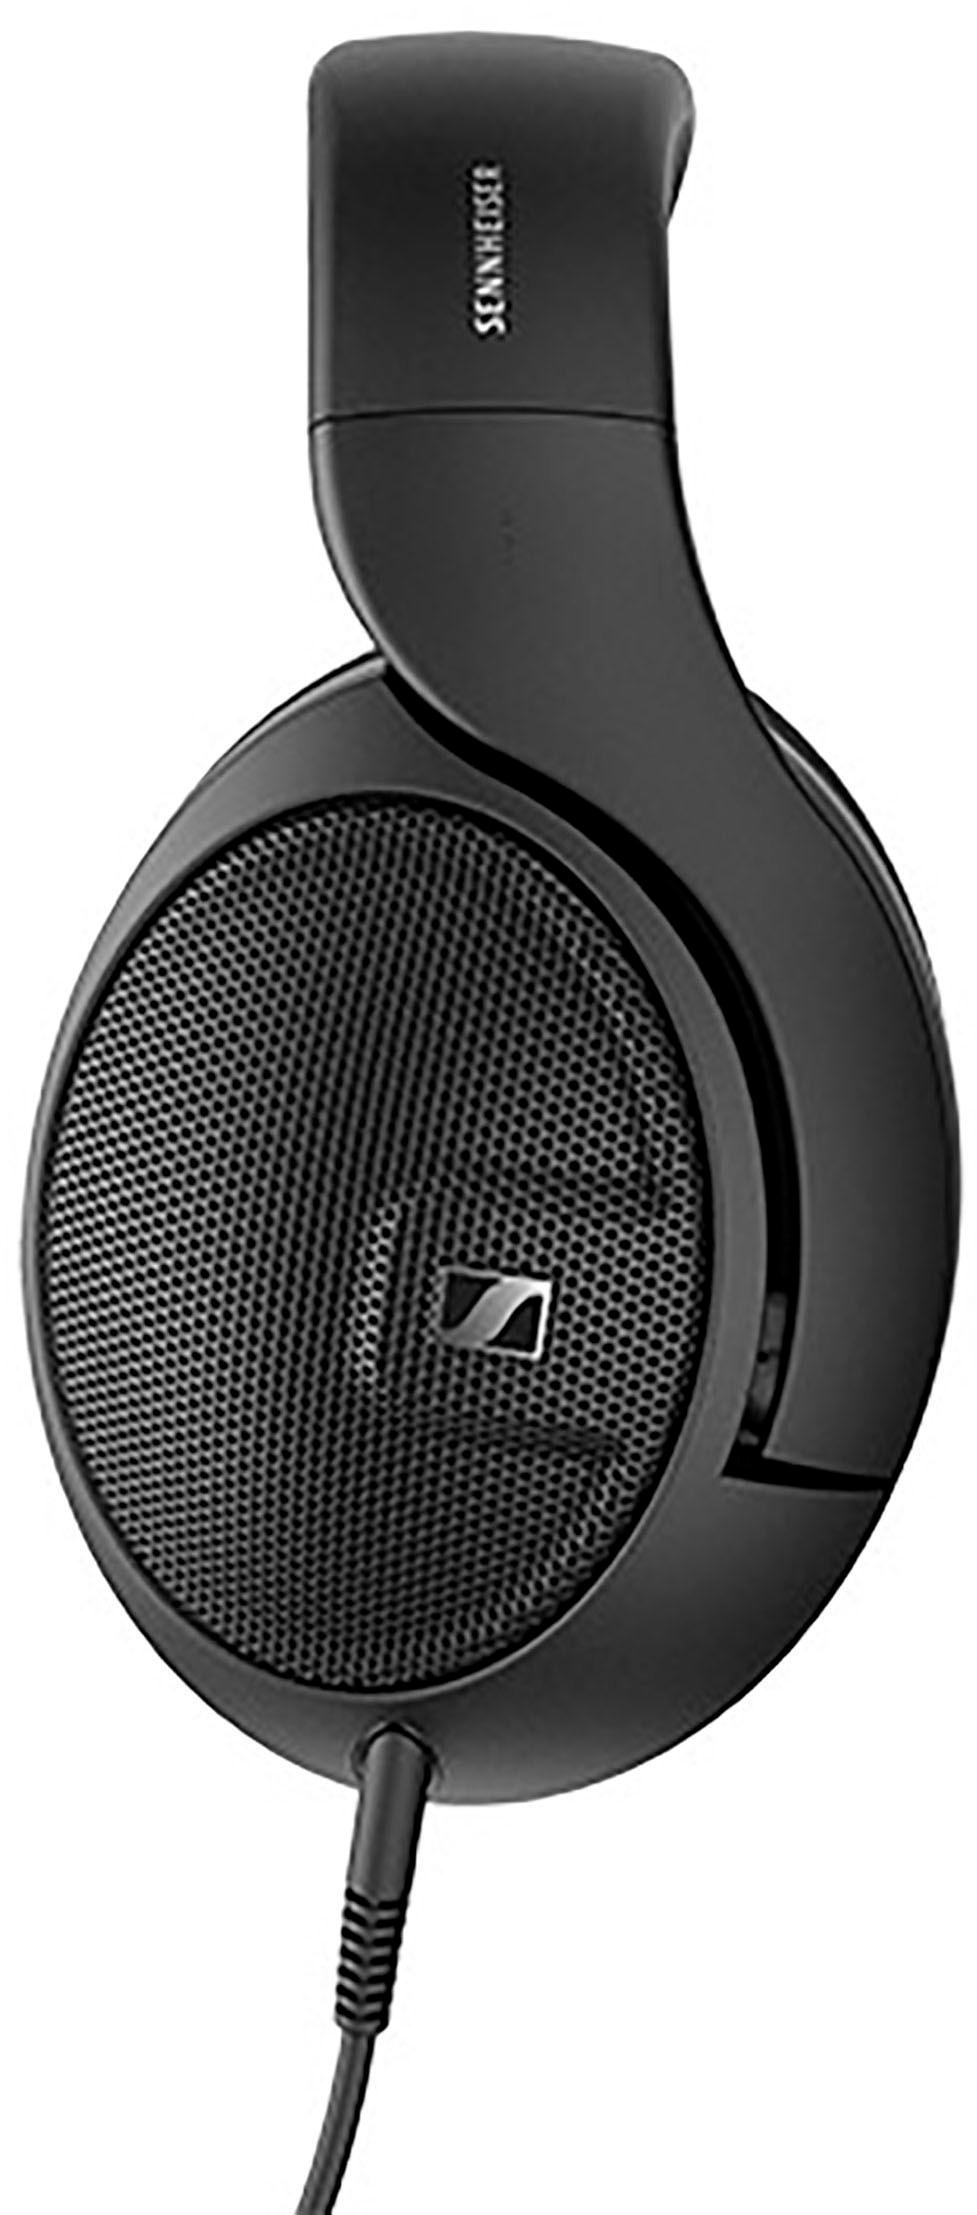 Angle View: Morpheus 360 - SERENITY Wireless Over-the-Ear Headphones with Microphone - Black/Silver